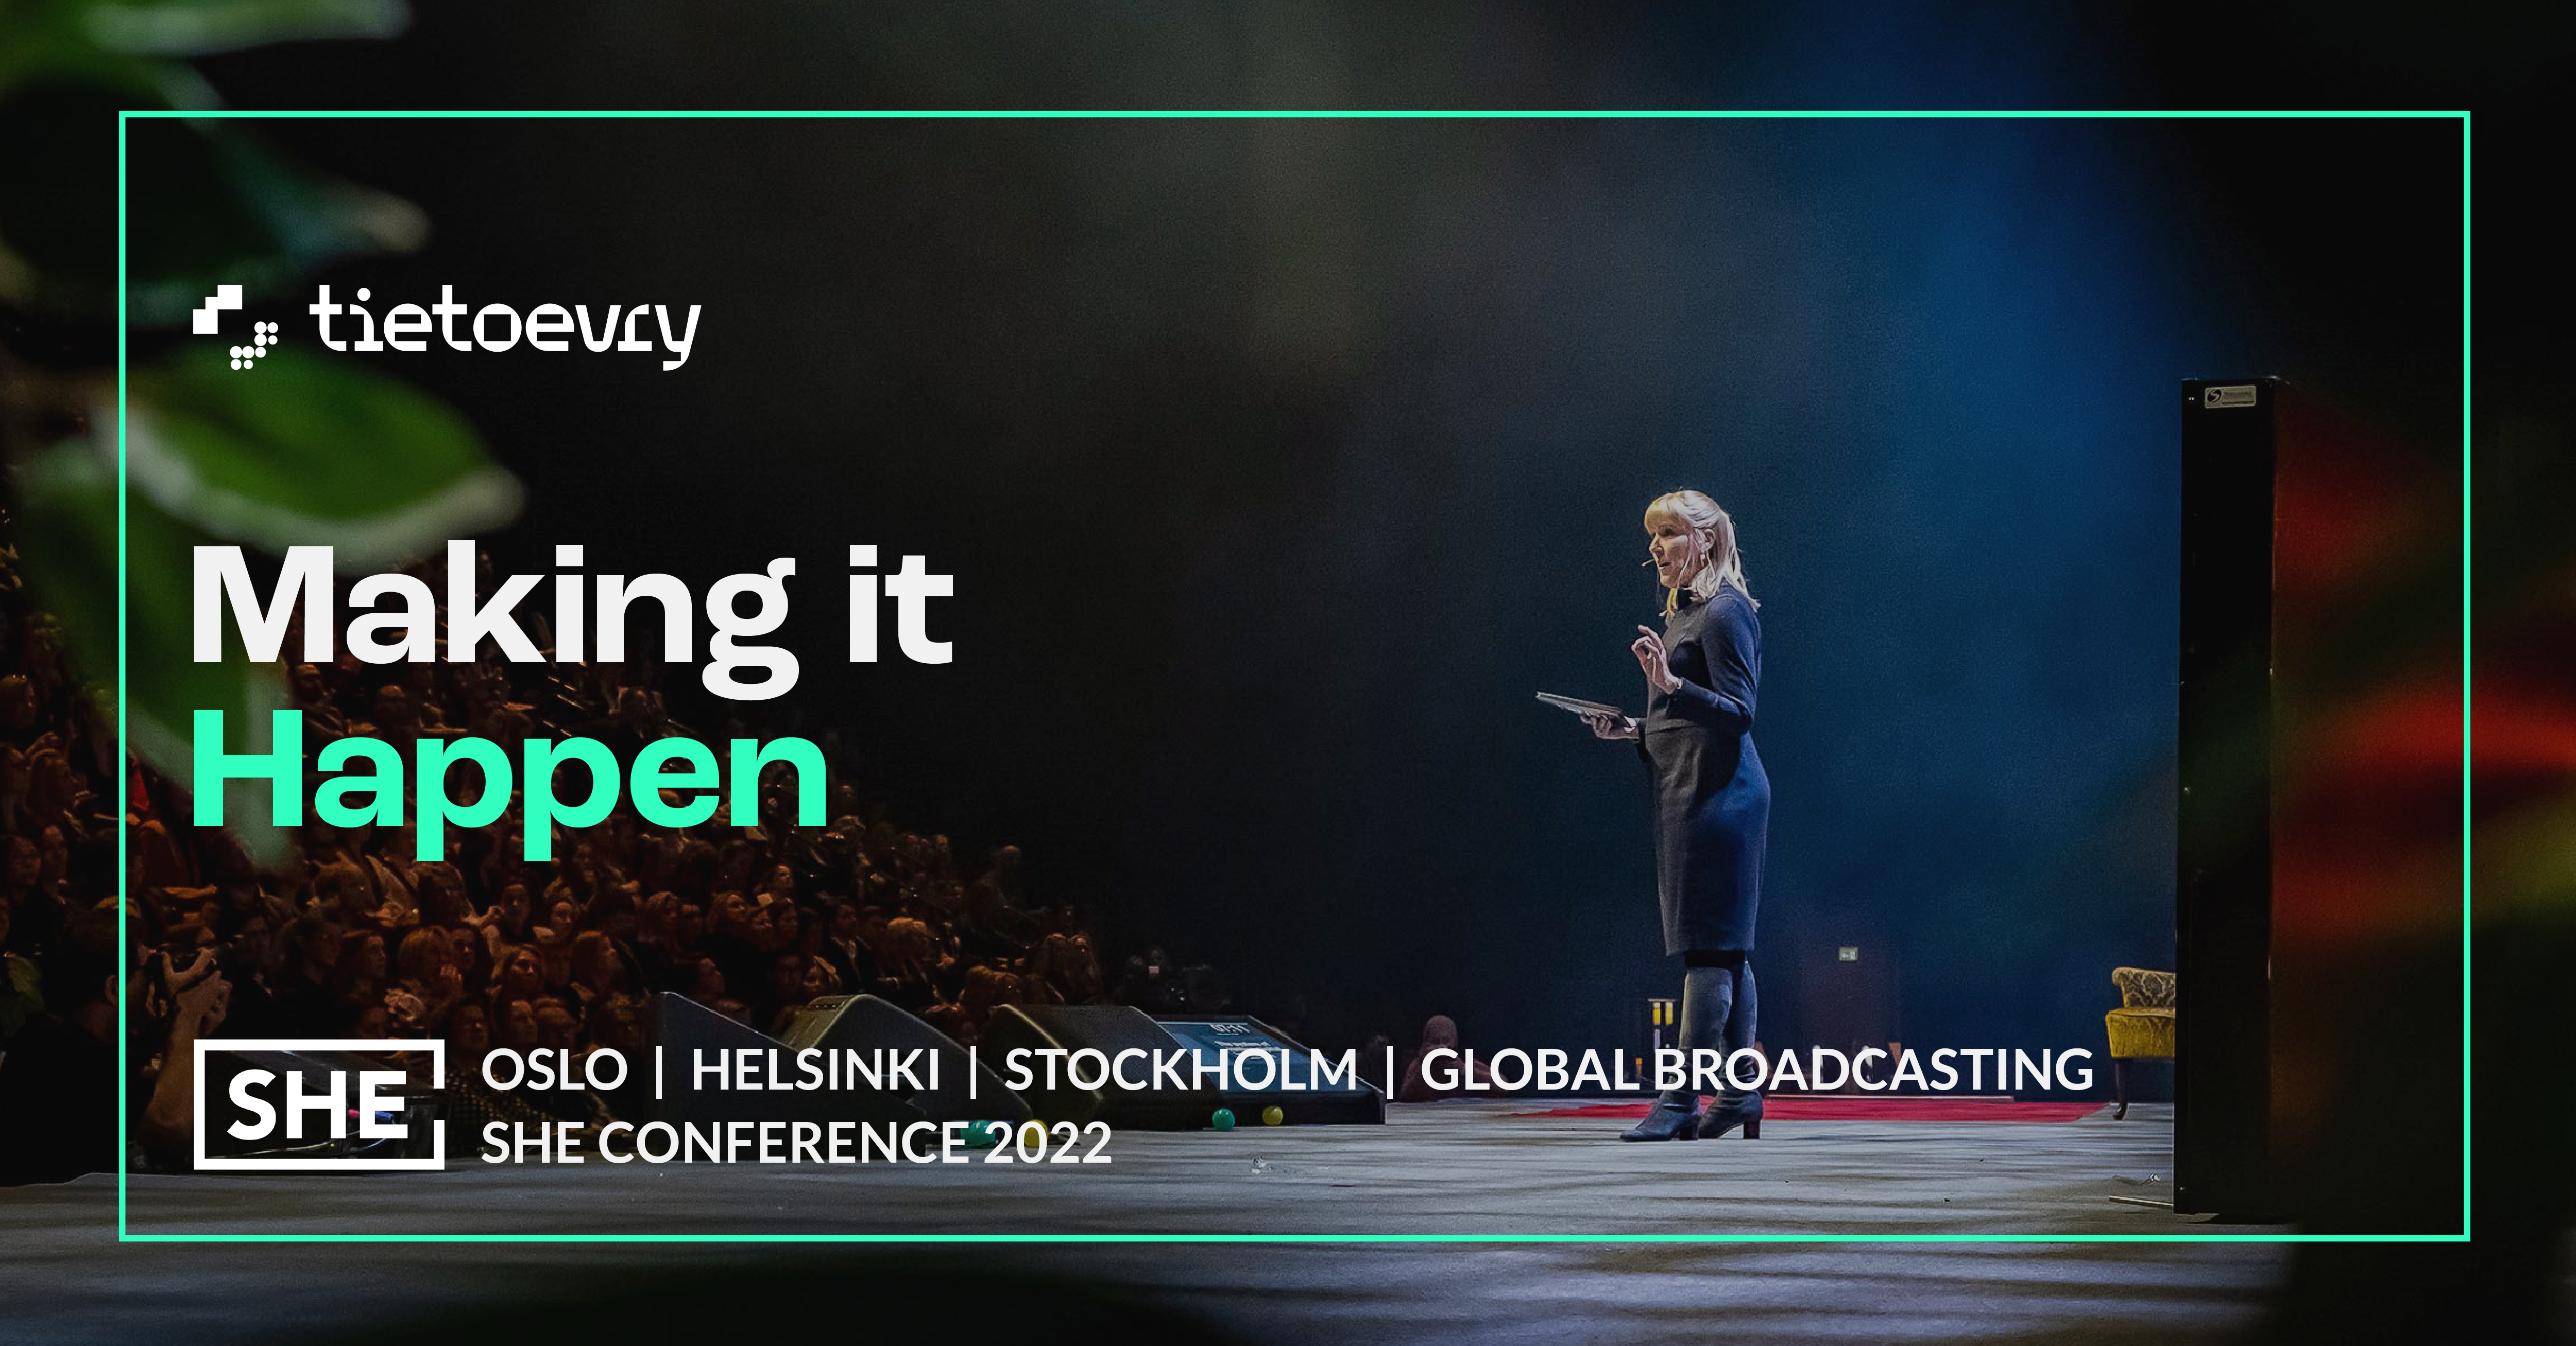 SHE Conference Global Broadcasting 2022